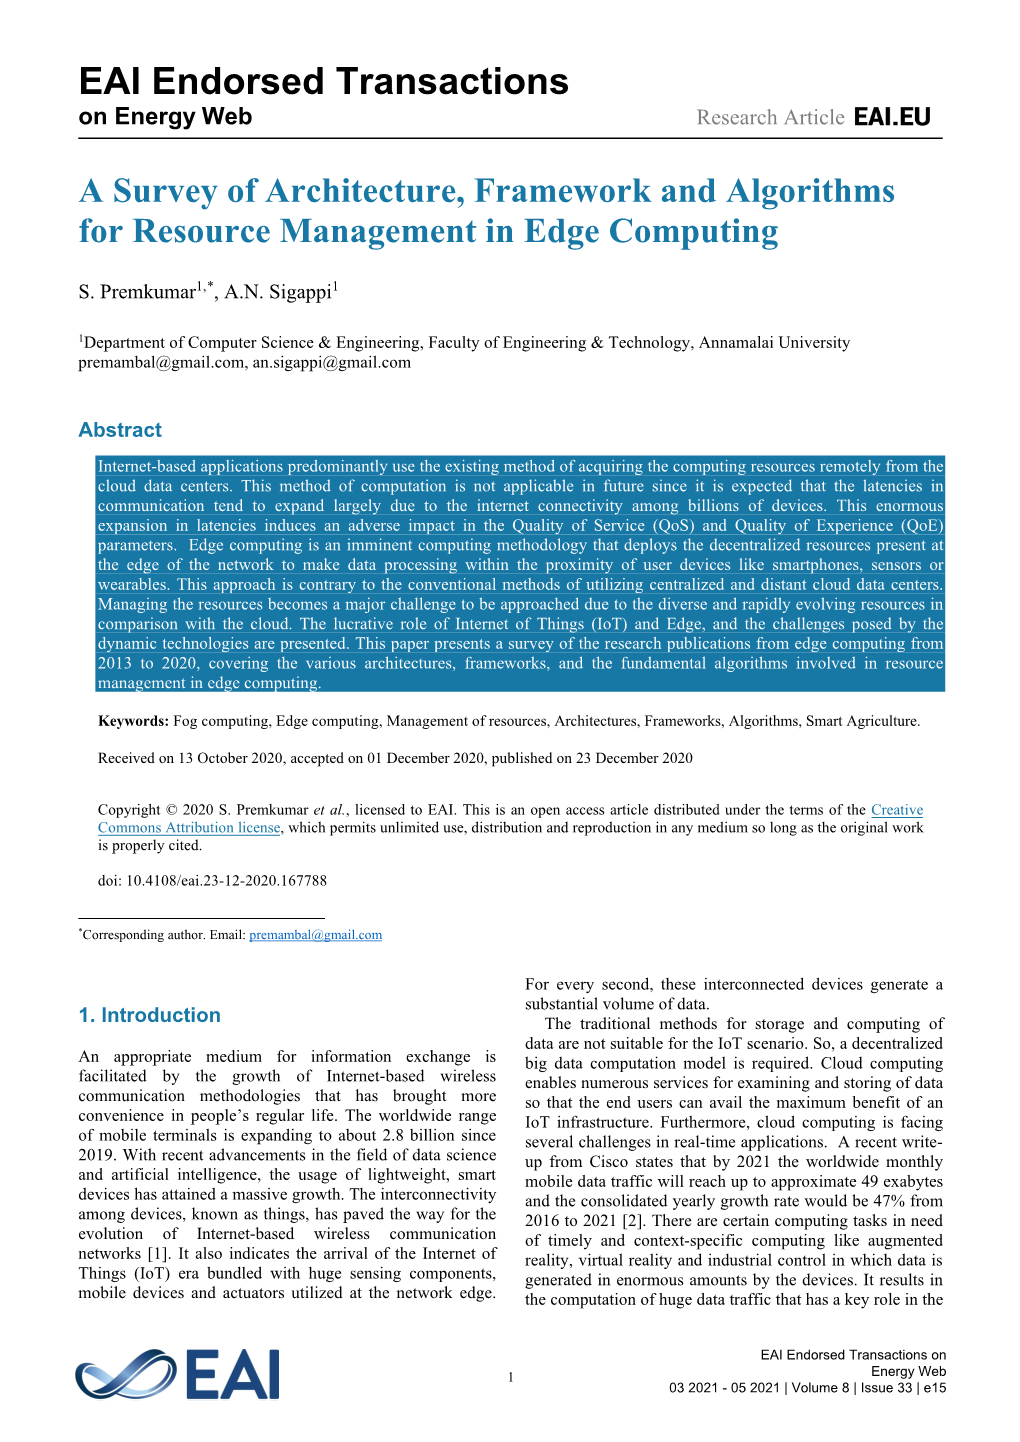 A Survey of Architecture, Framework and Algorithms for Resource Management in Edge Computing